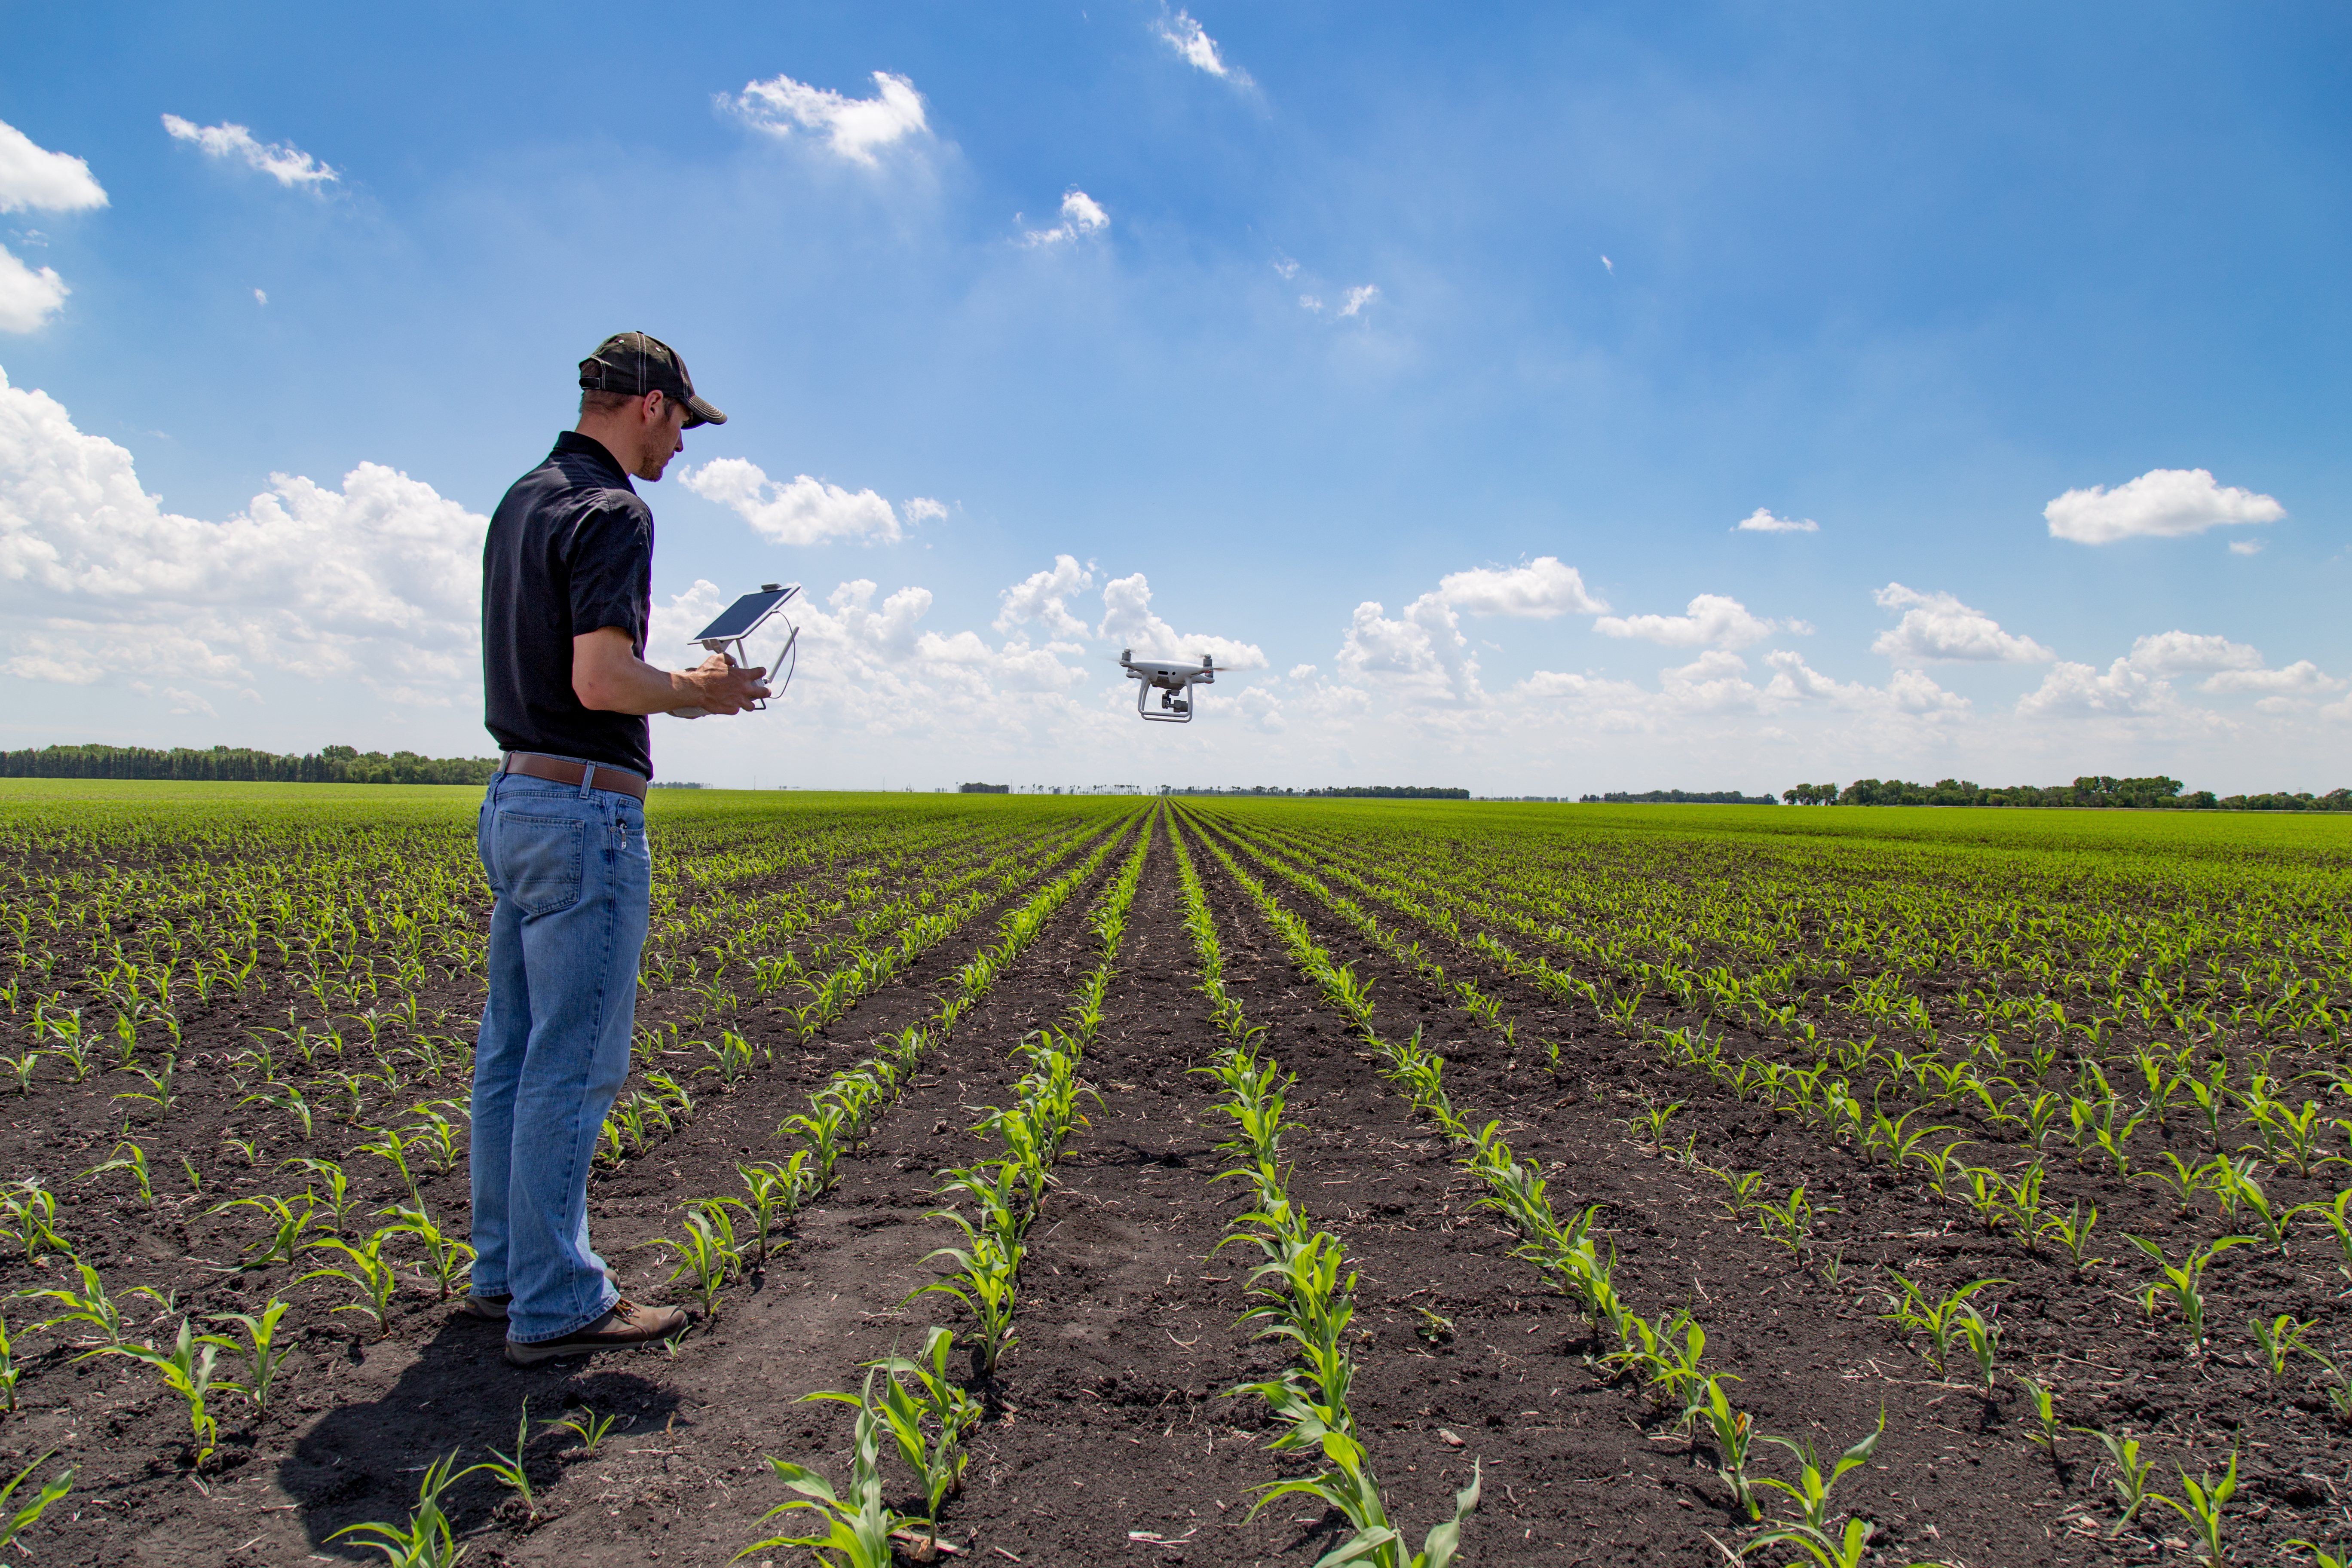 Agronomist using technology in agricultural corn fields